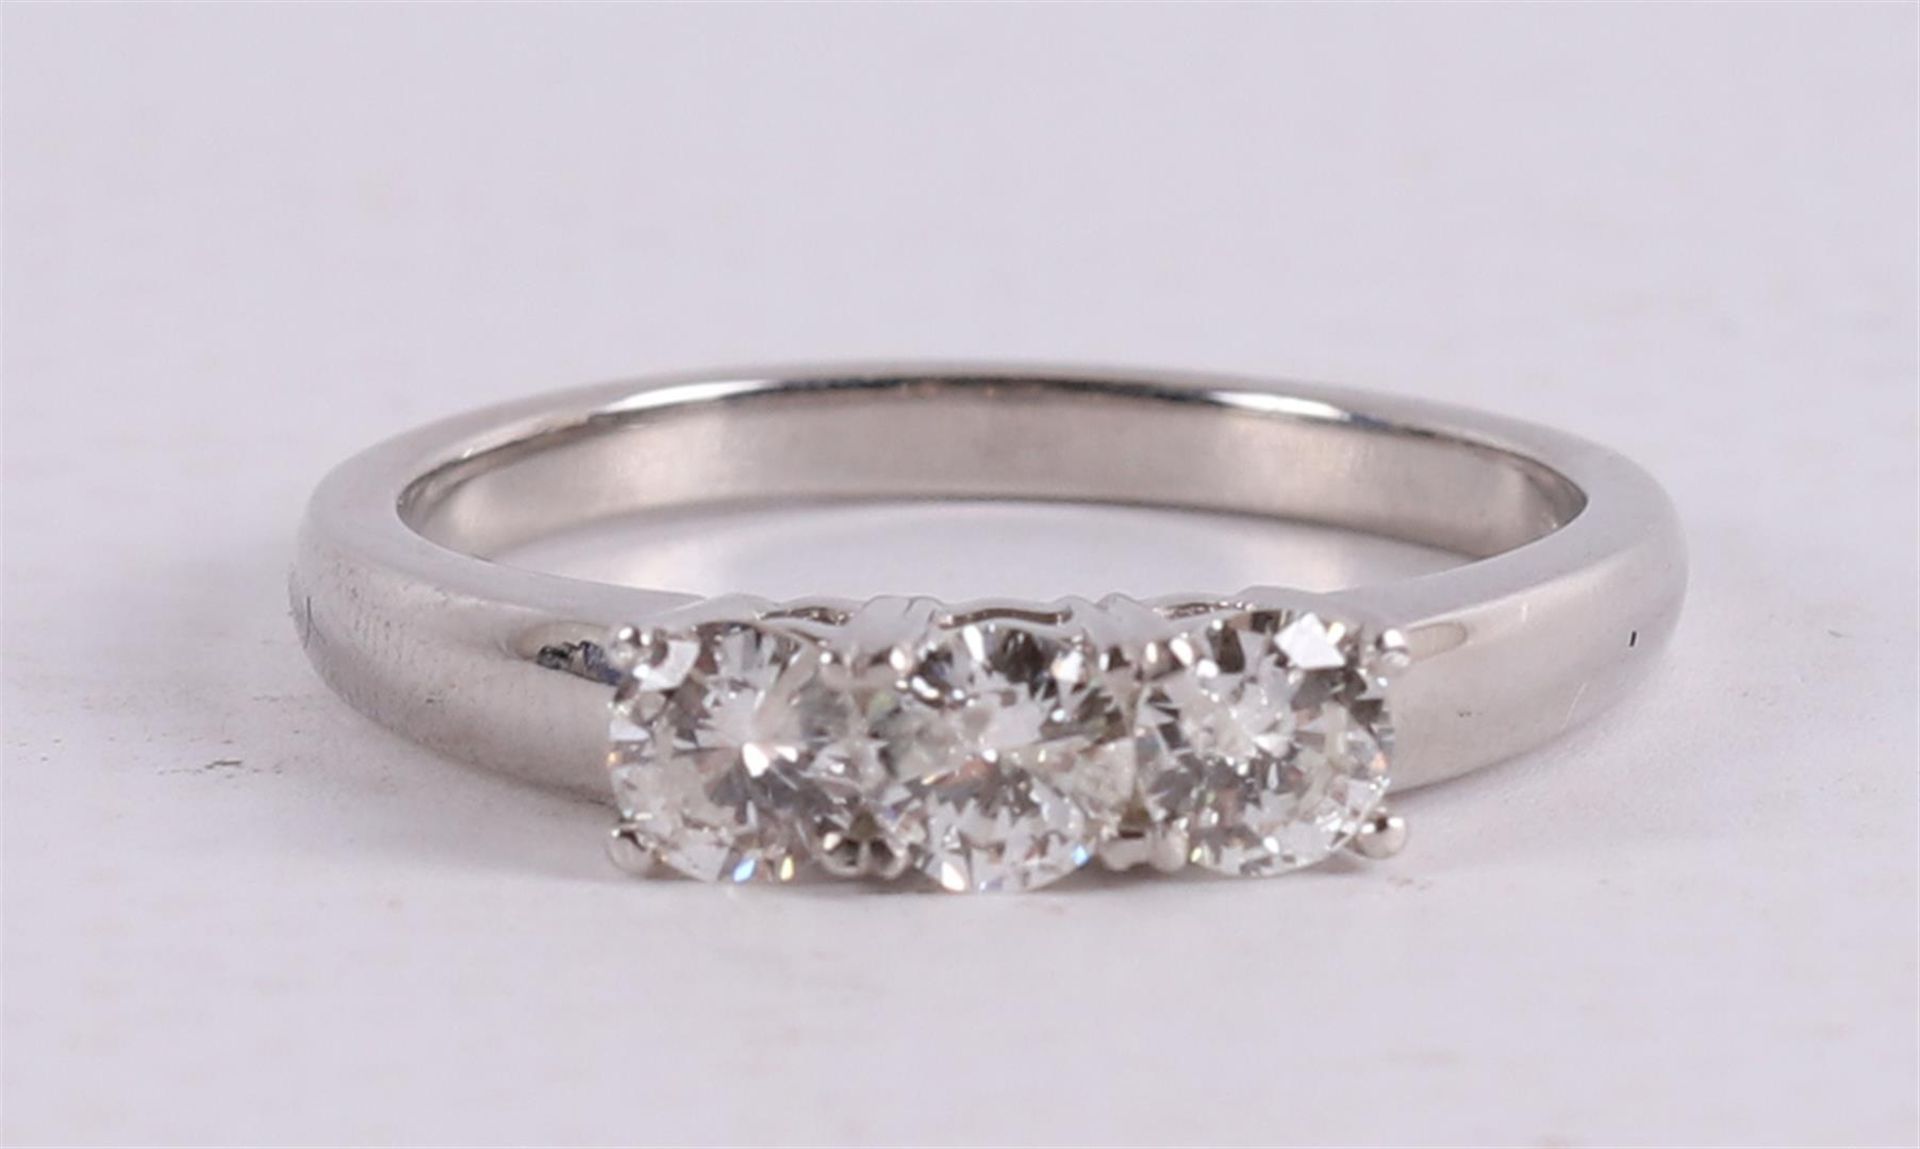 A platinum 950/1000 row ring set with three diamonds of approximately 0.2 crt ea